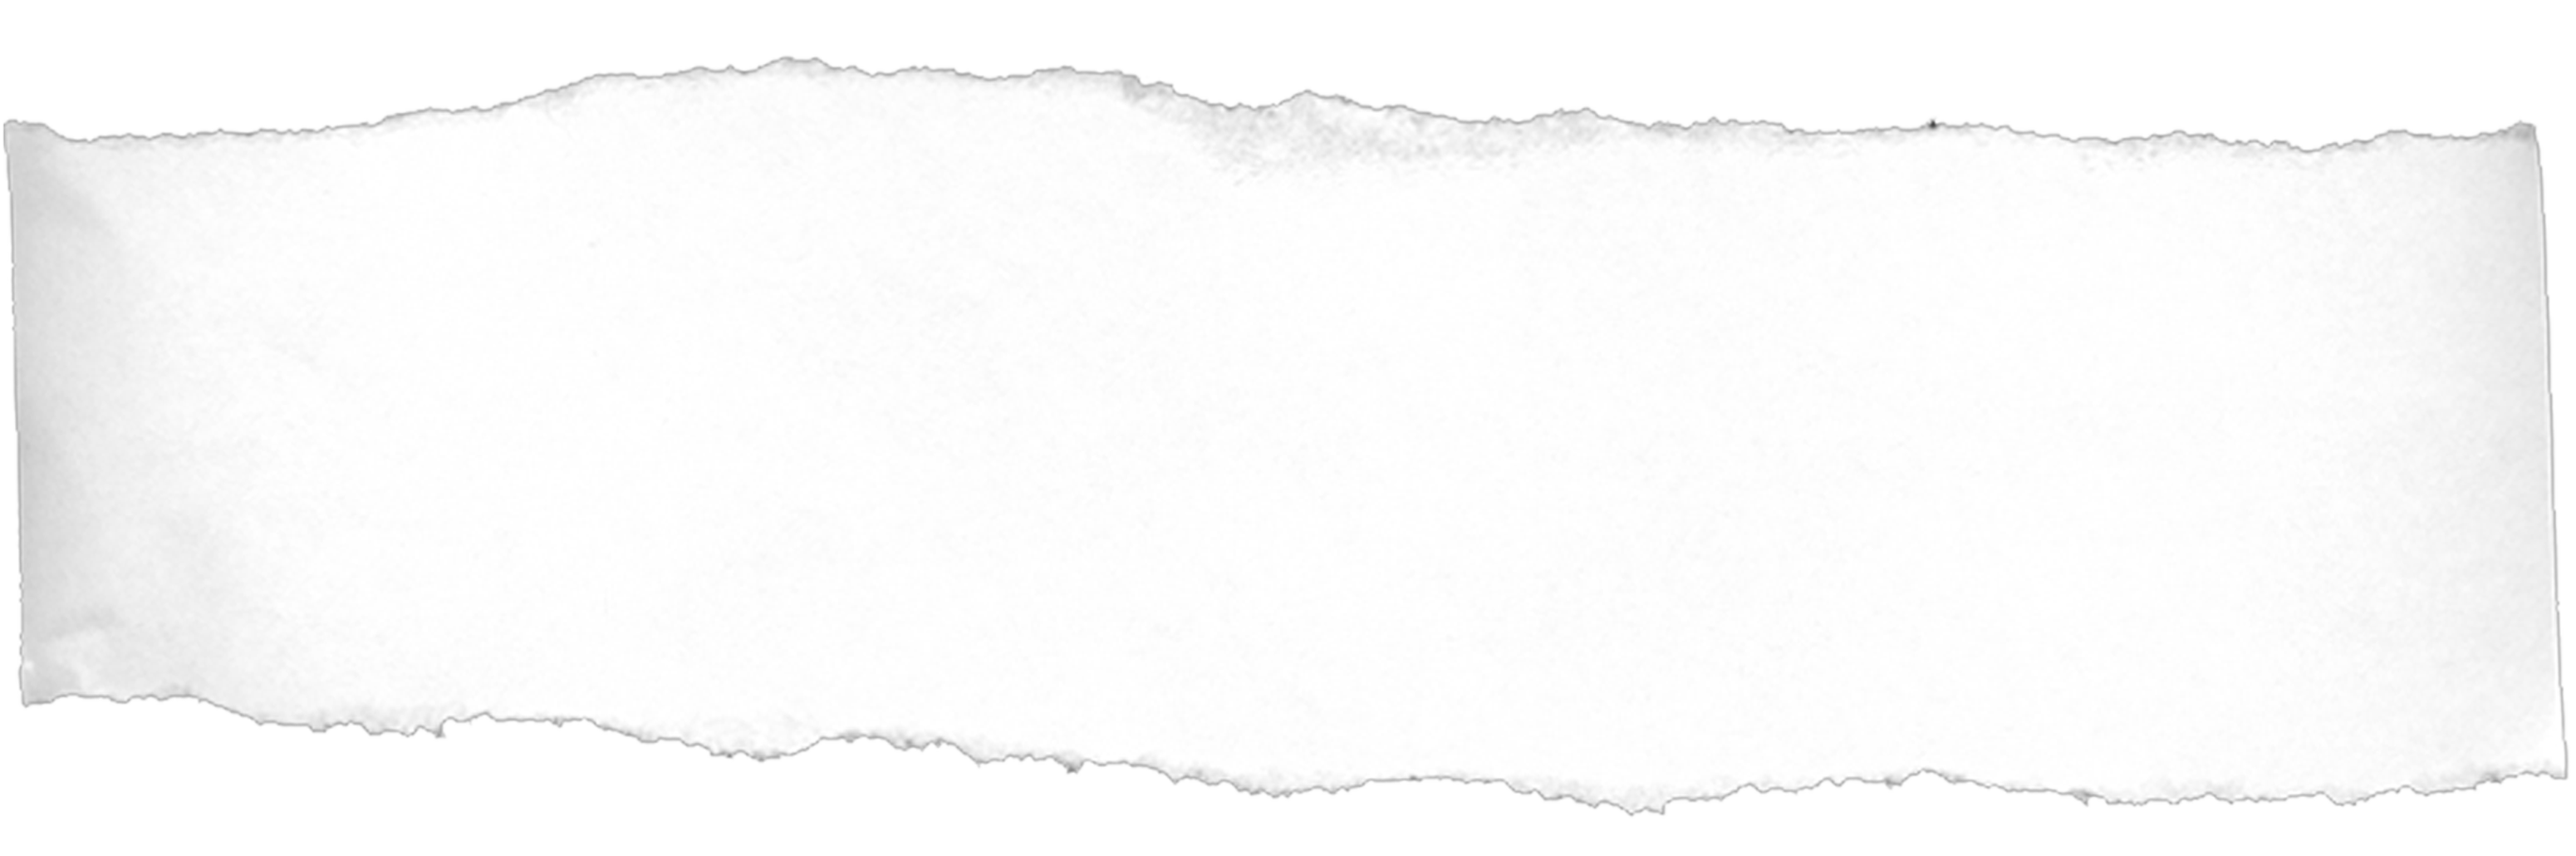 white out picture background